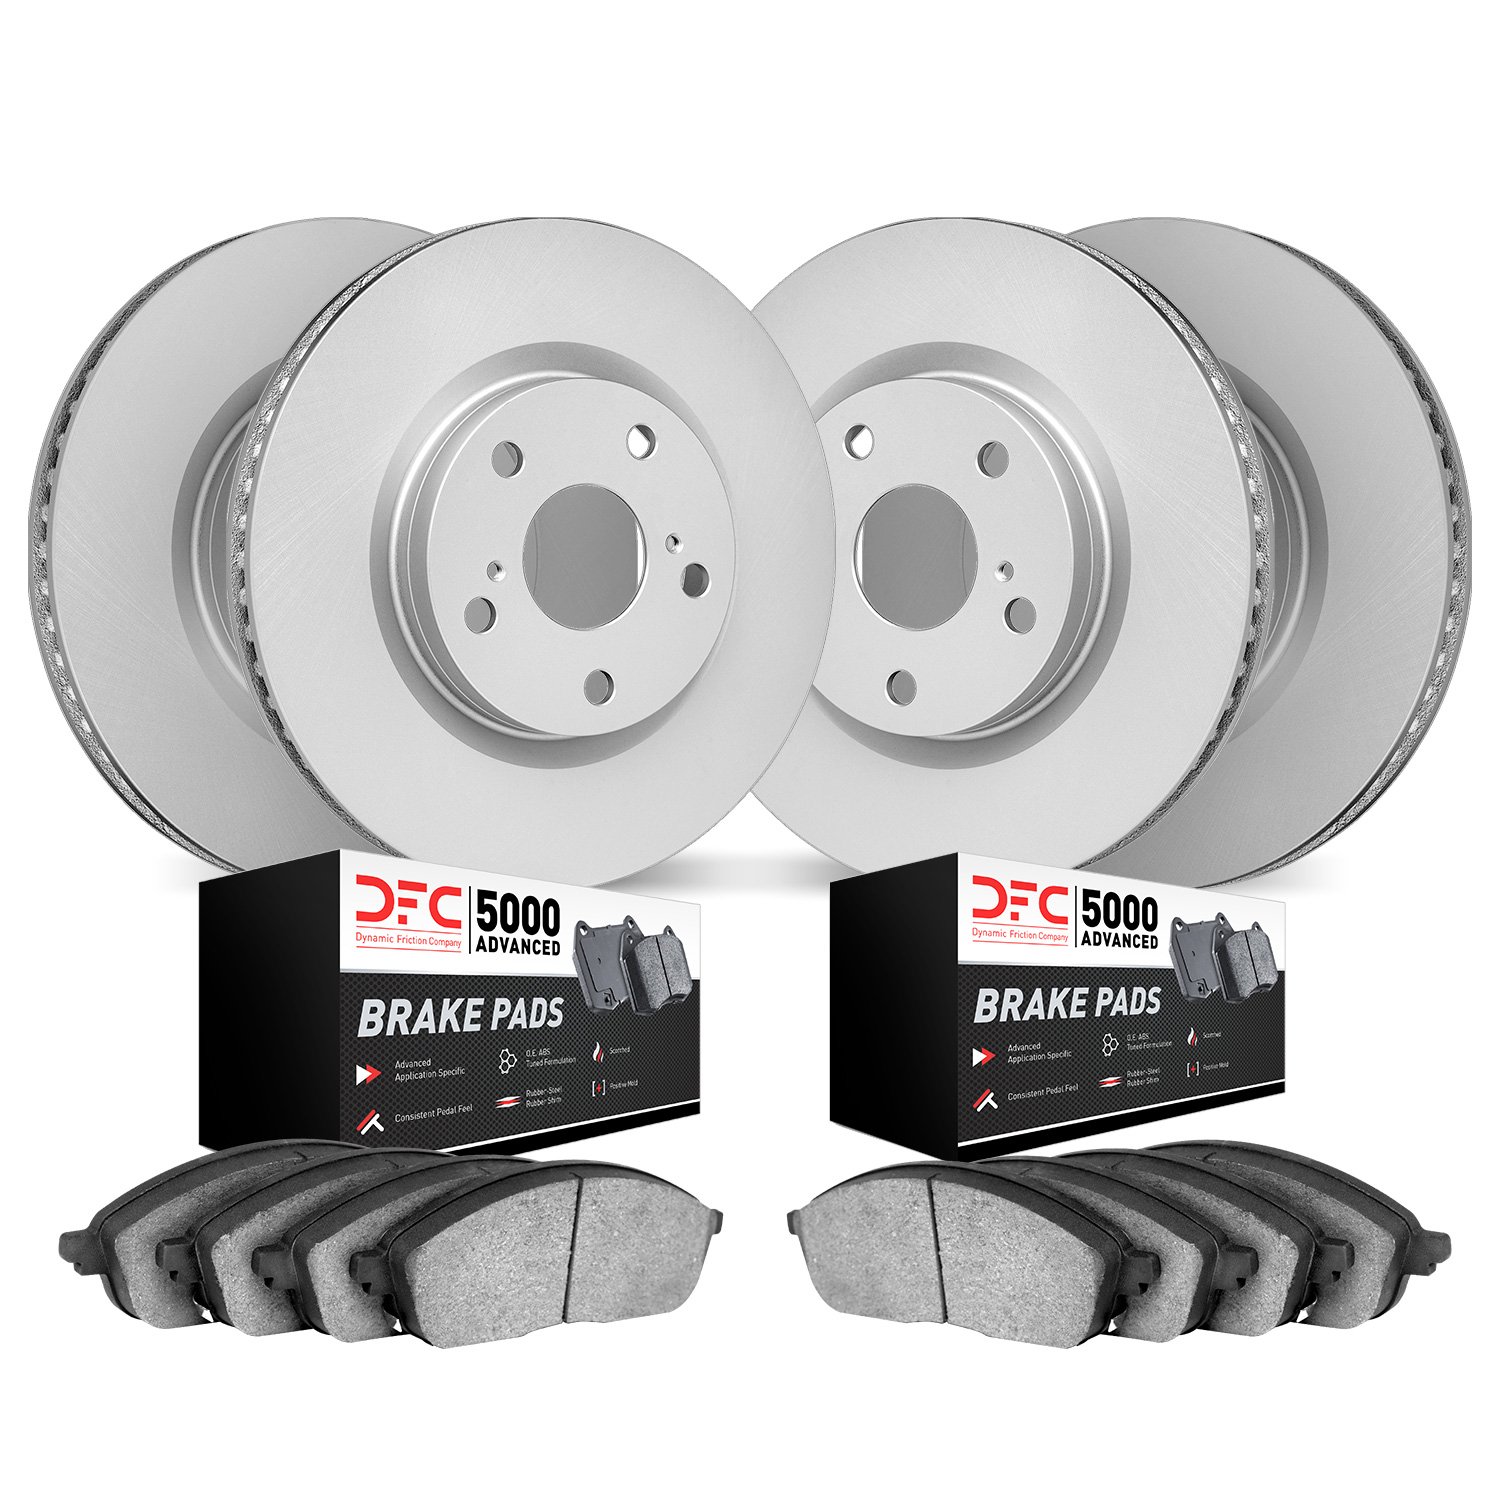 4504-31148 Geospec Brake Rotors w/5000 Advanced Brake Pads Kit, Fits Select BMW, Position: Front and Rear